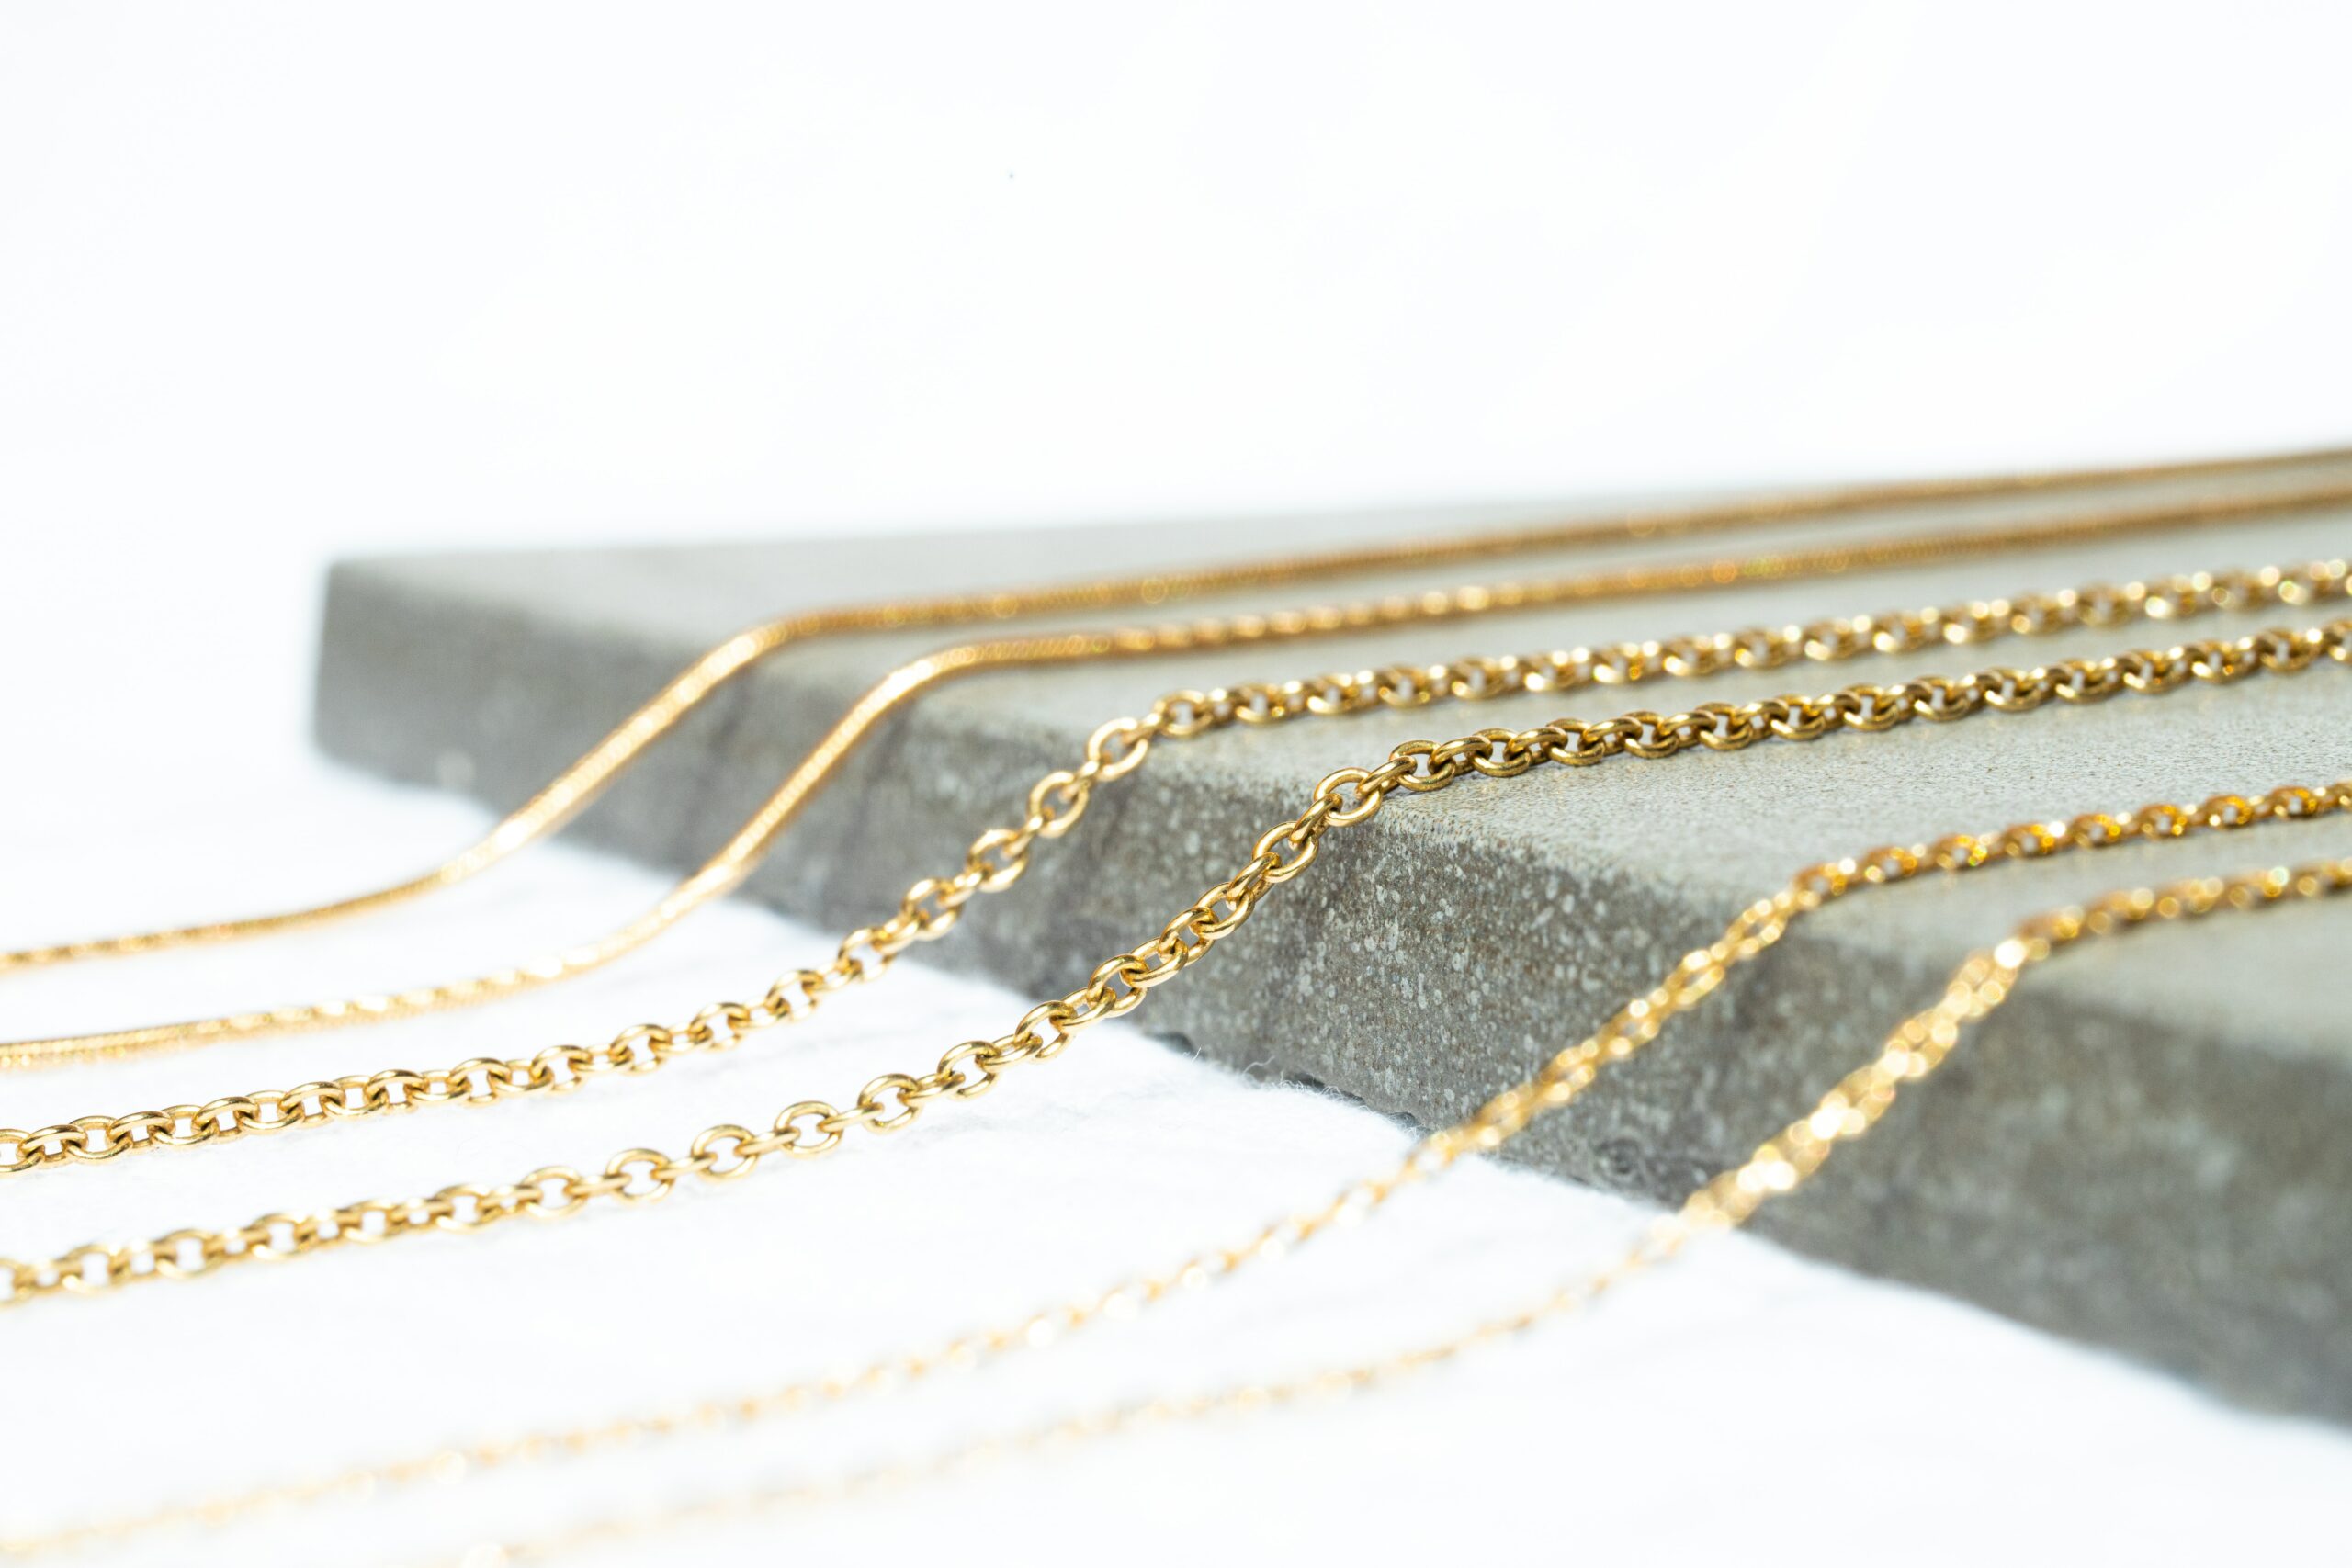 Various textures and sizes of gold chain on display.